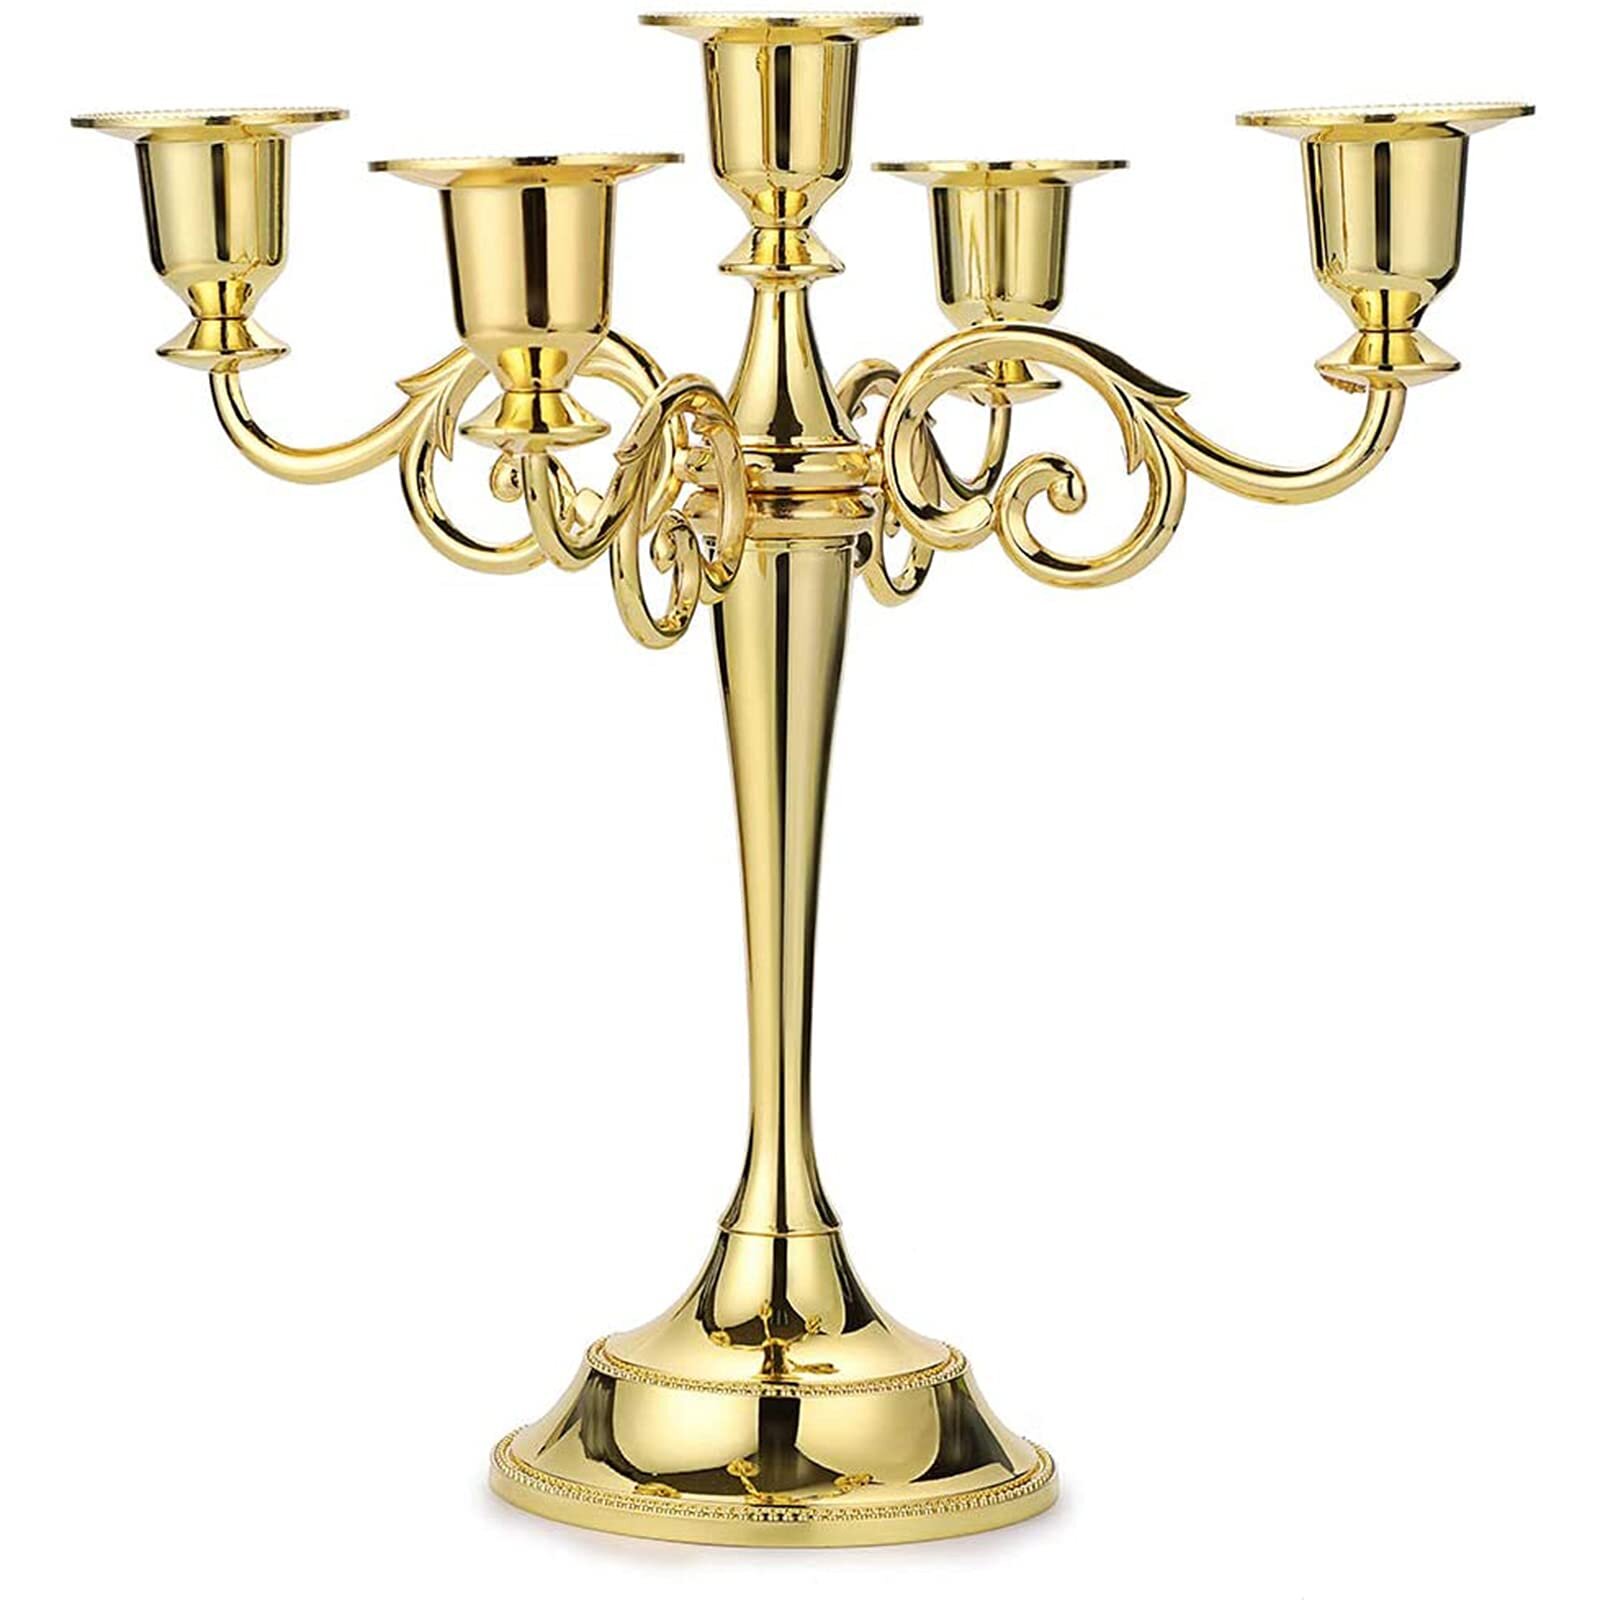 2 25" Black Gold Metallic Candle Holders Candelabras Home Party Wedding Gift 